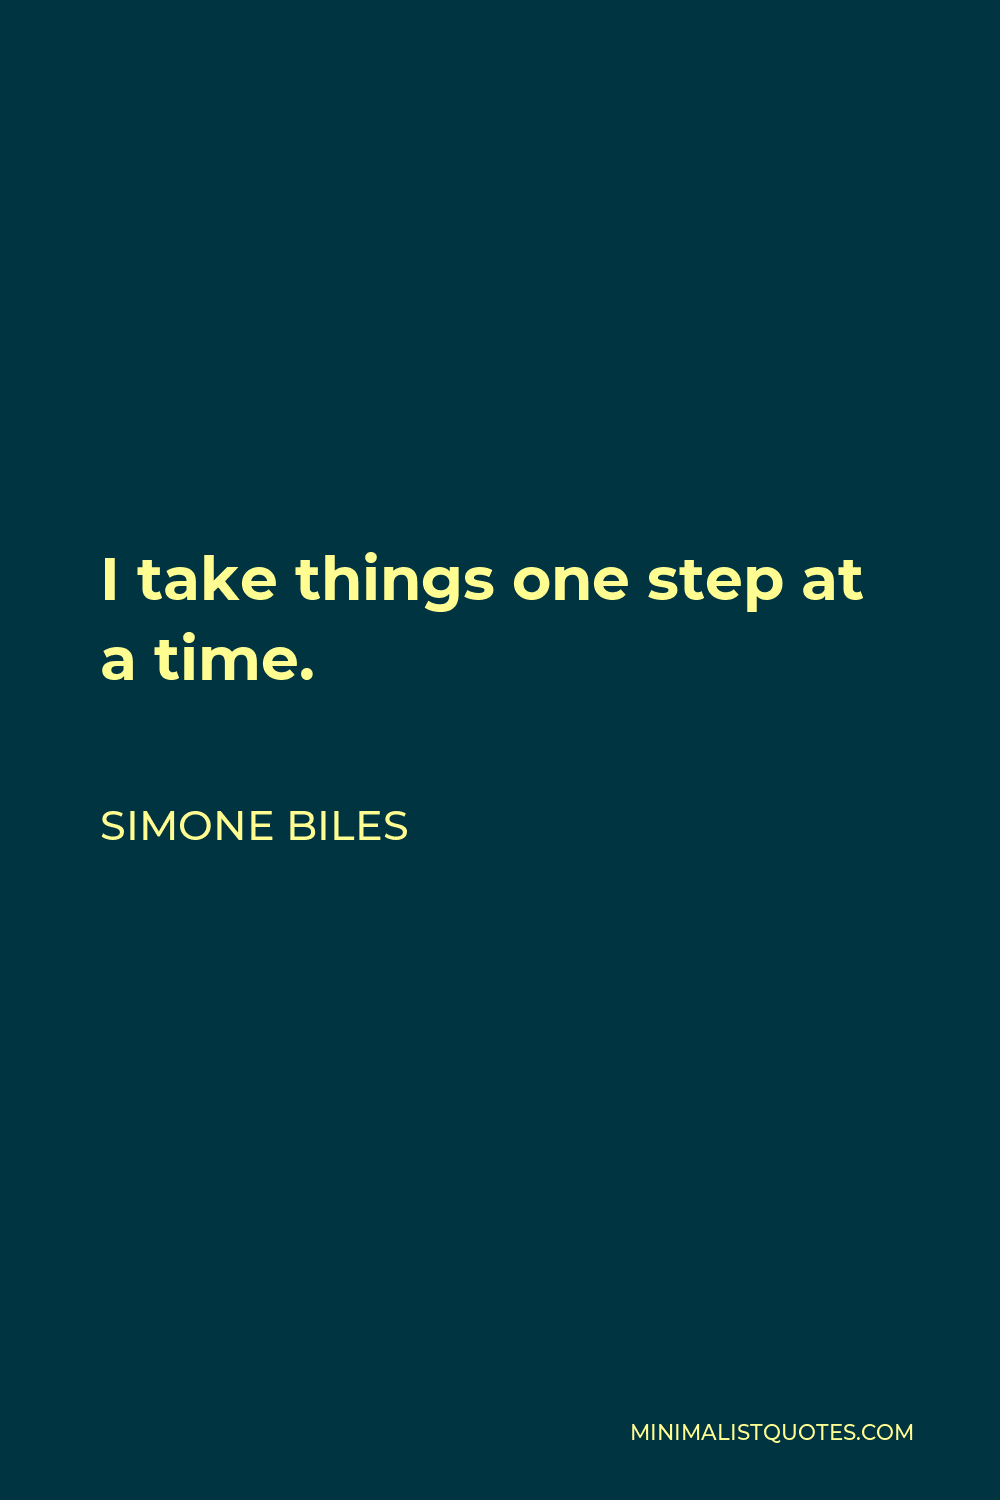 Simone Biles Quote - I take things one step at a time.